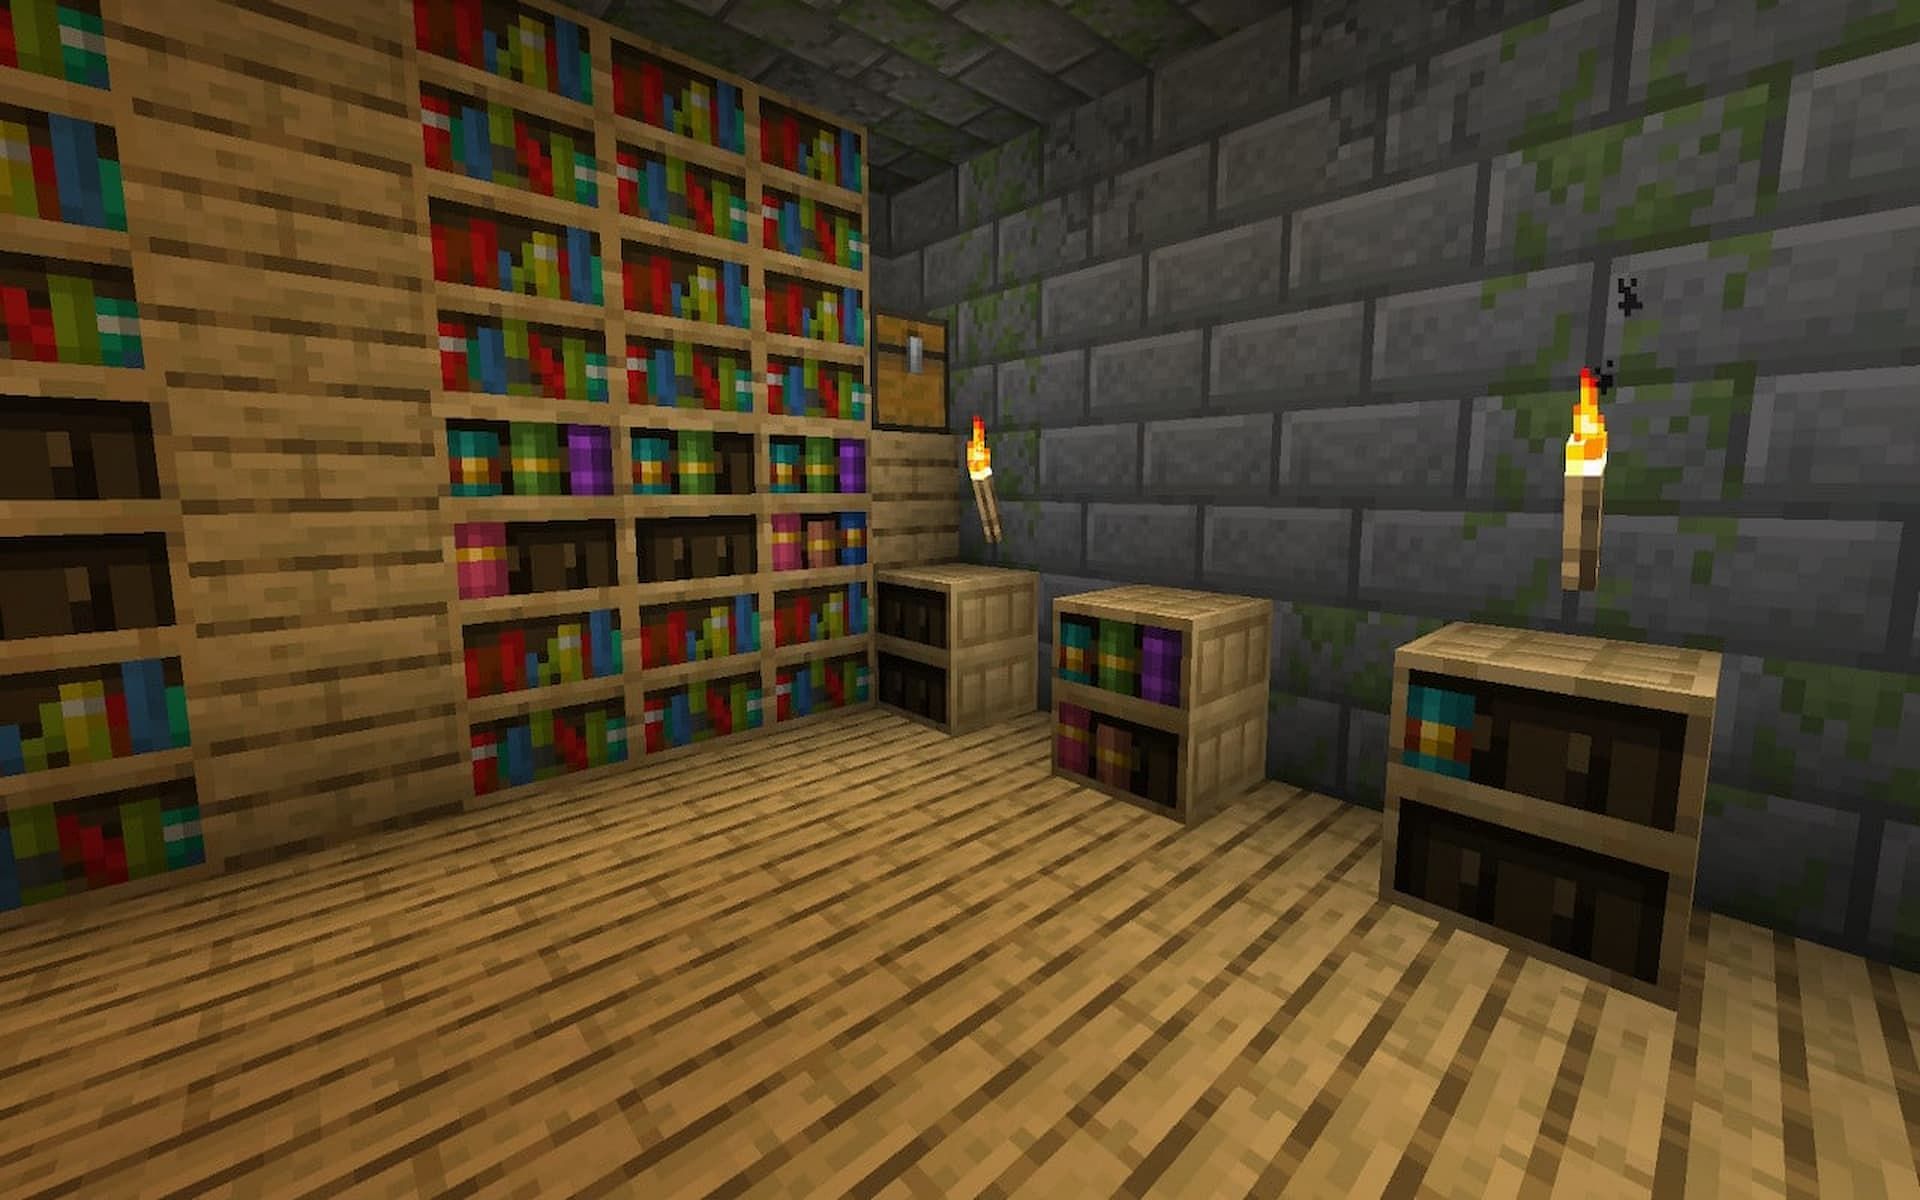 Players can create a chiseled bookshelf in 1.20 to store their books (Image via Minecraft.net)